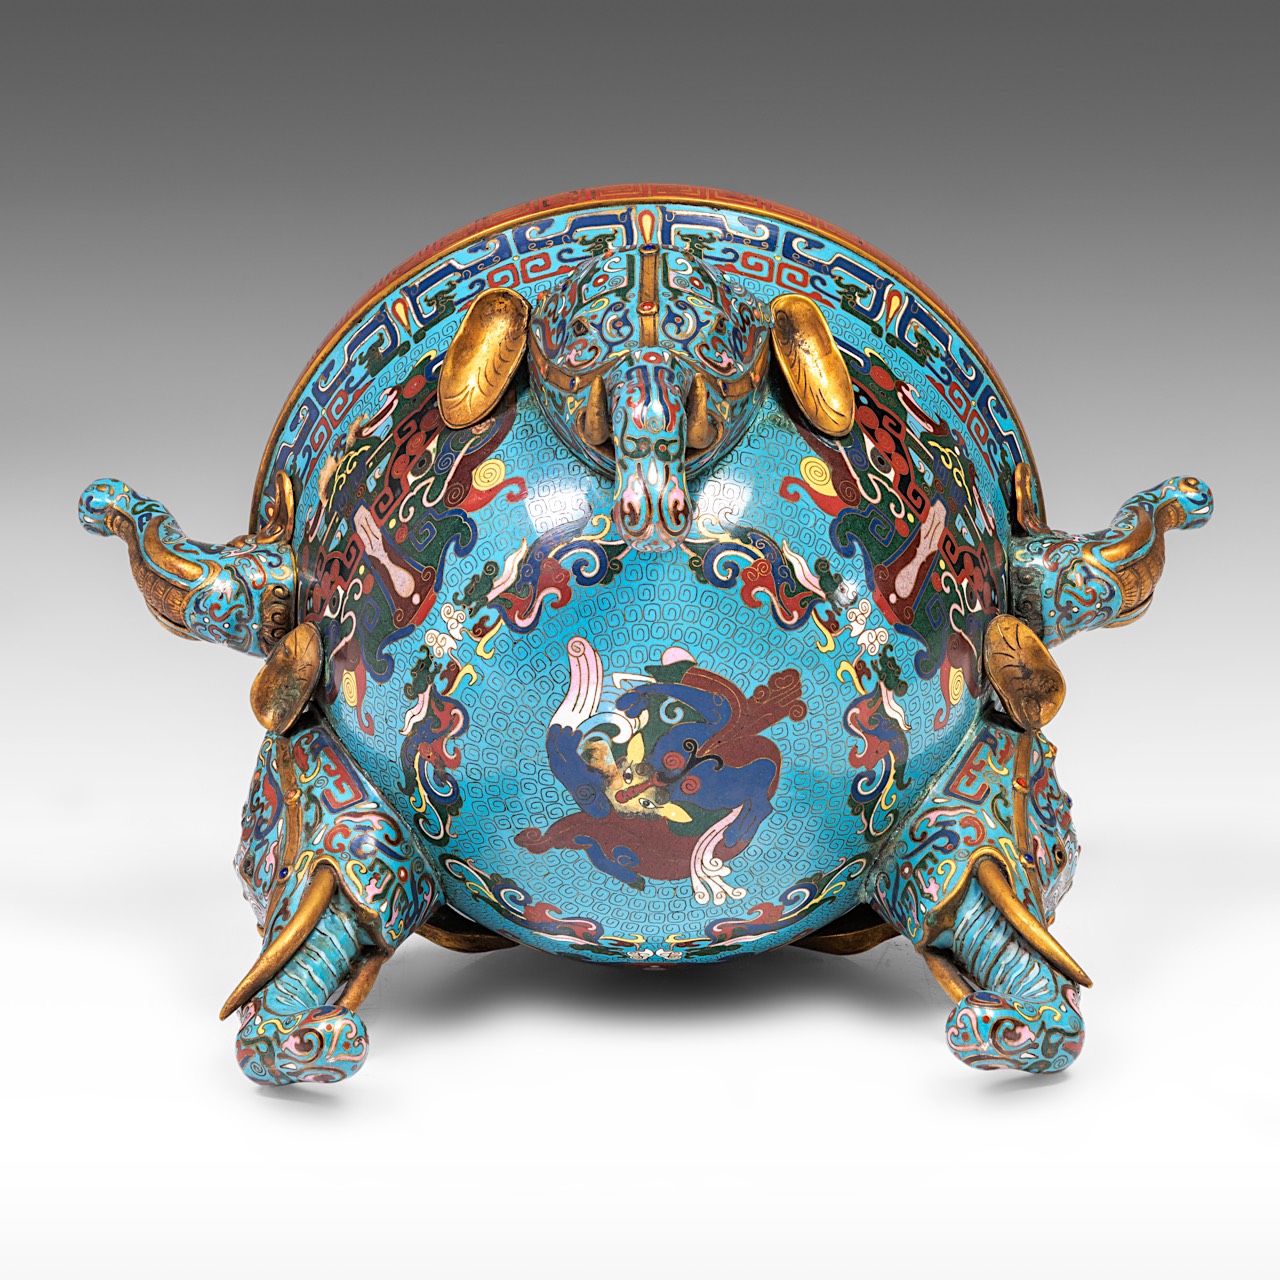 A Chinese five-piece semi-precious stone inlaid cloisonne garniture, late Qing/20thC, tallest H 58 - - Image 9 of 24